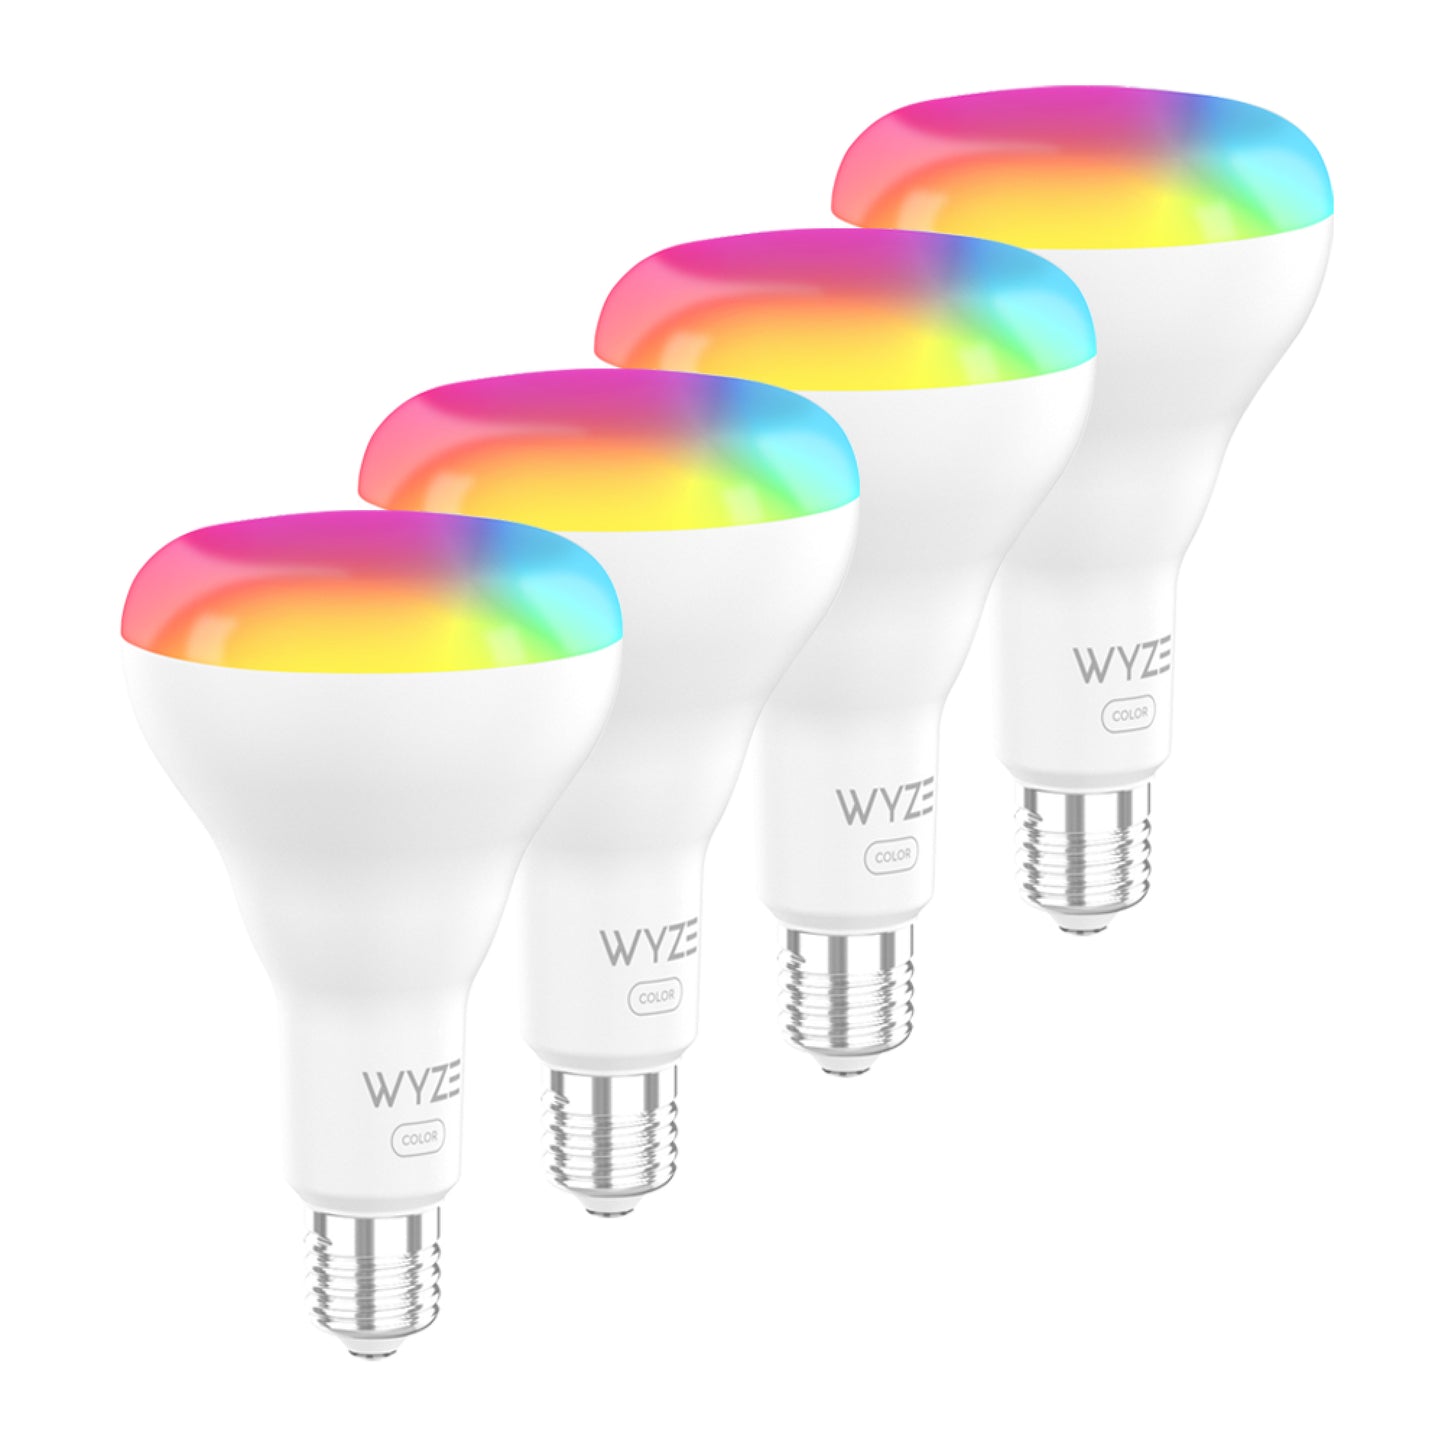 3D render of four BR30 light bulbs against a white background.